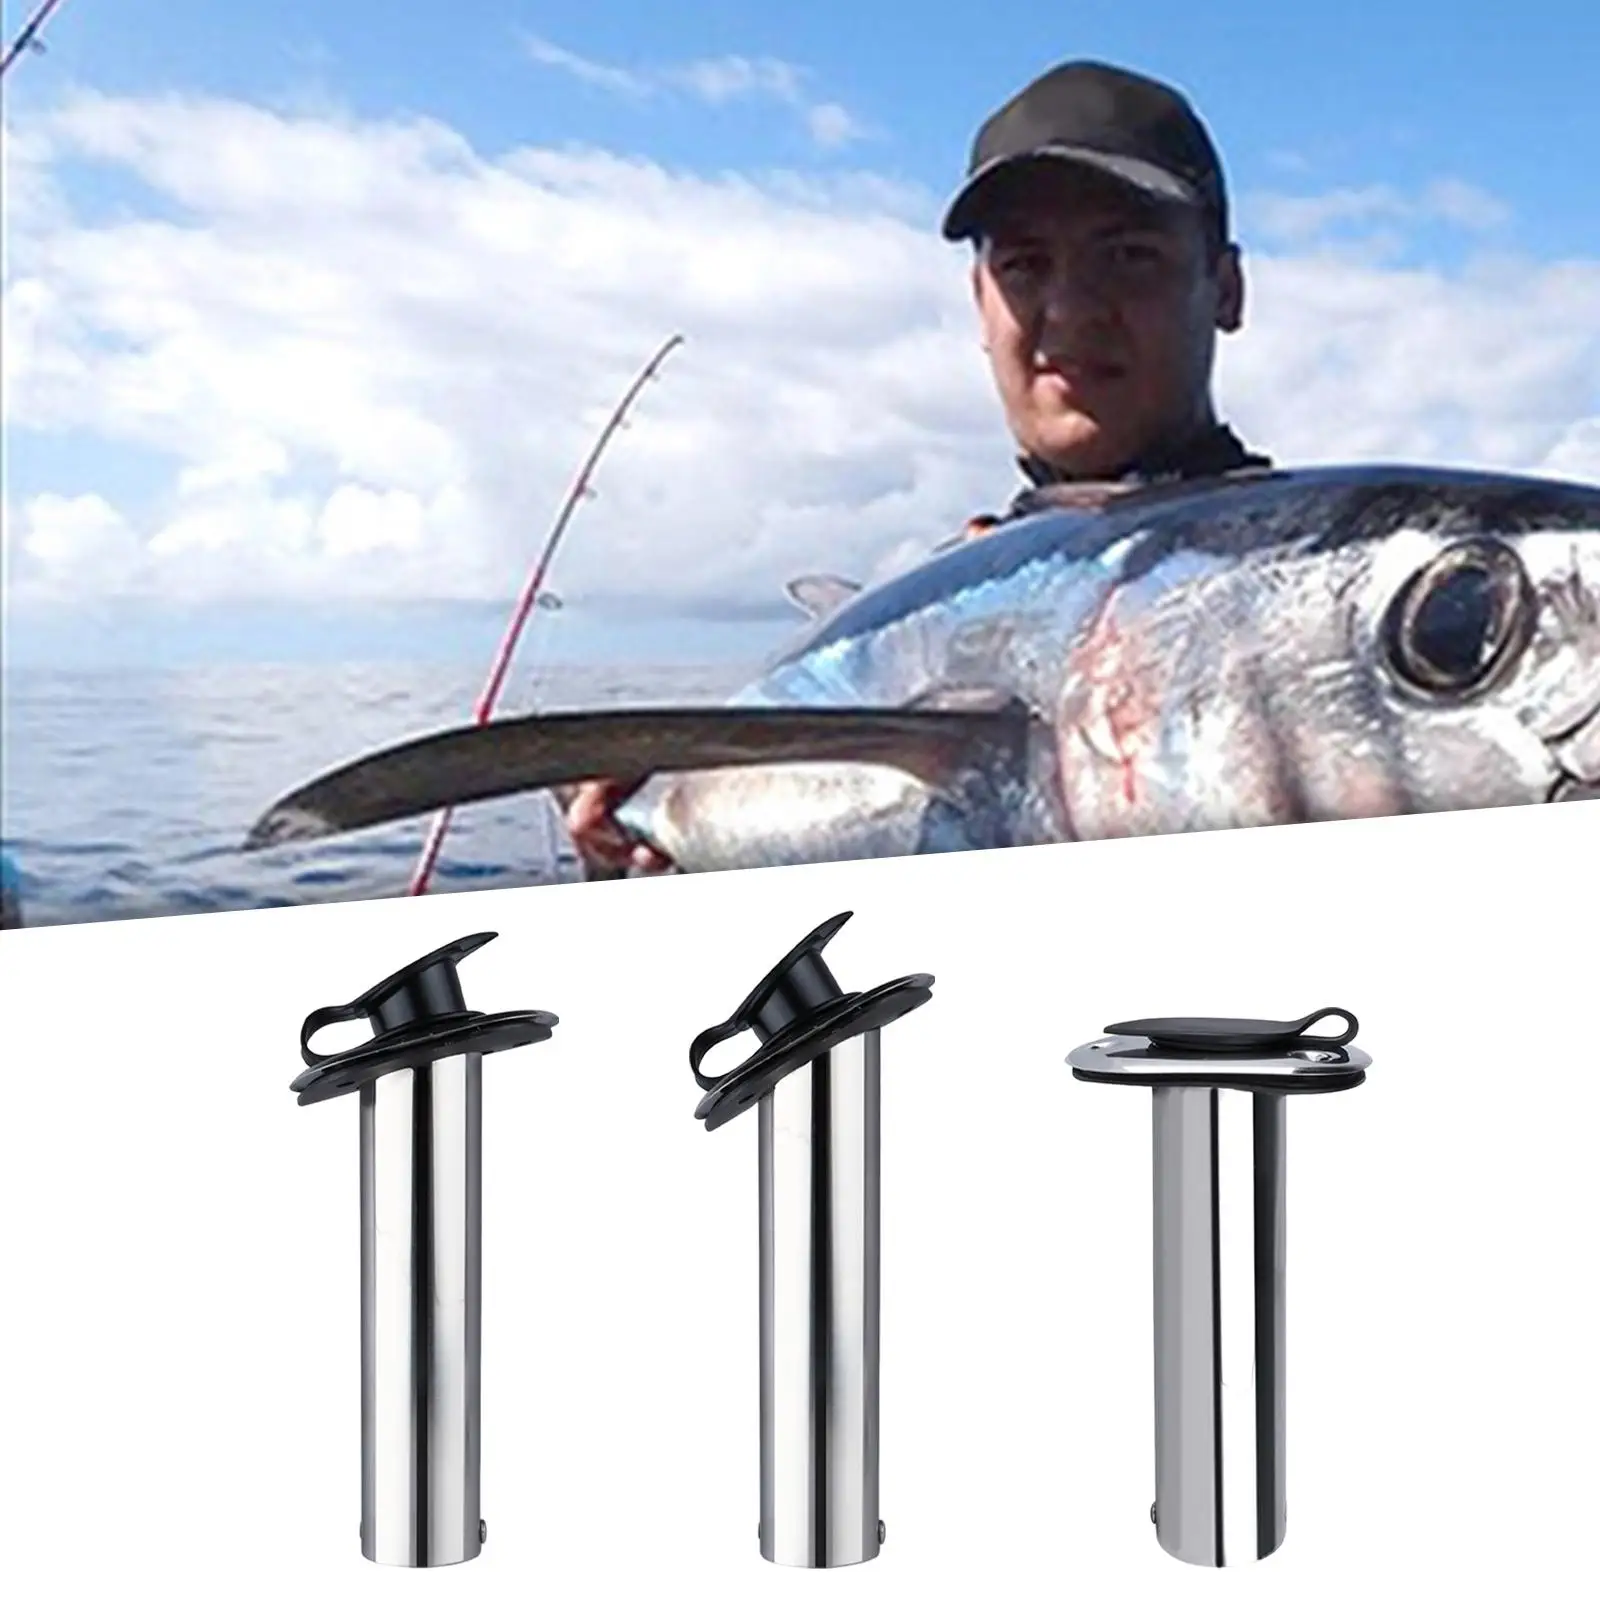 Fishing Rod Holder Flush Mount Boat Rod Holder Stainless Steel Fishing Tackle Tool Accessory for Fish Boat Yacht Marine Kayak